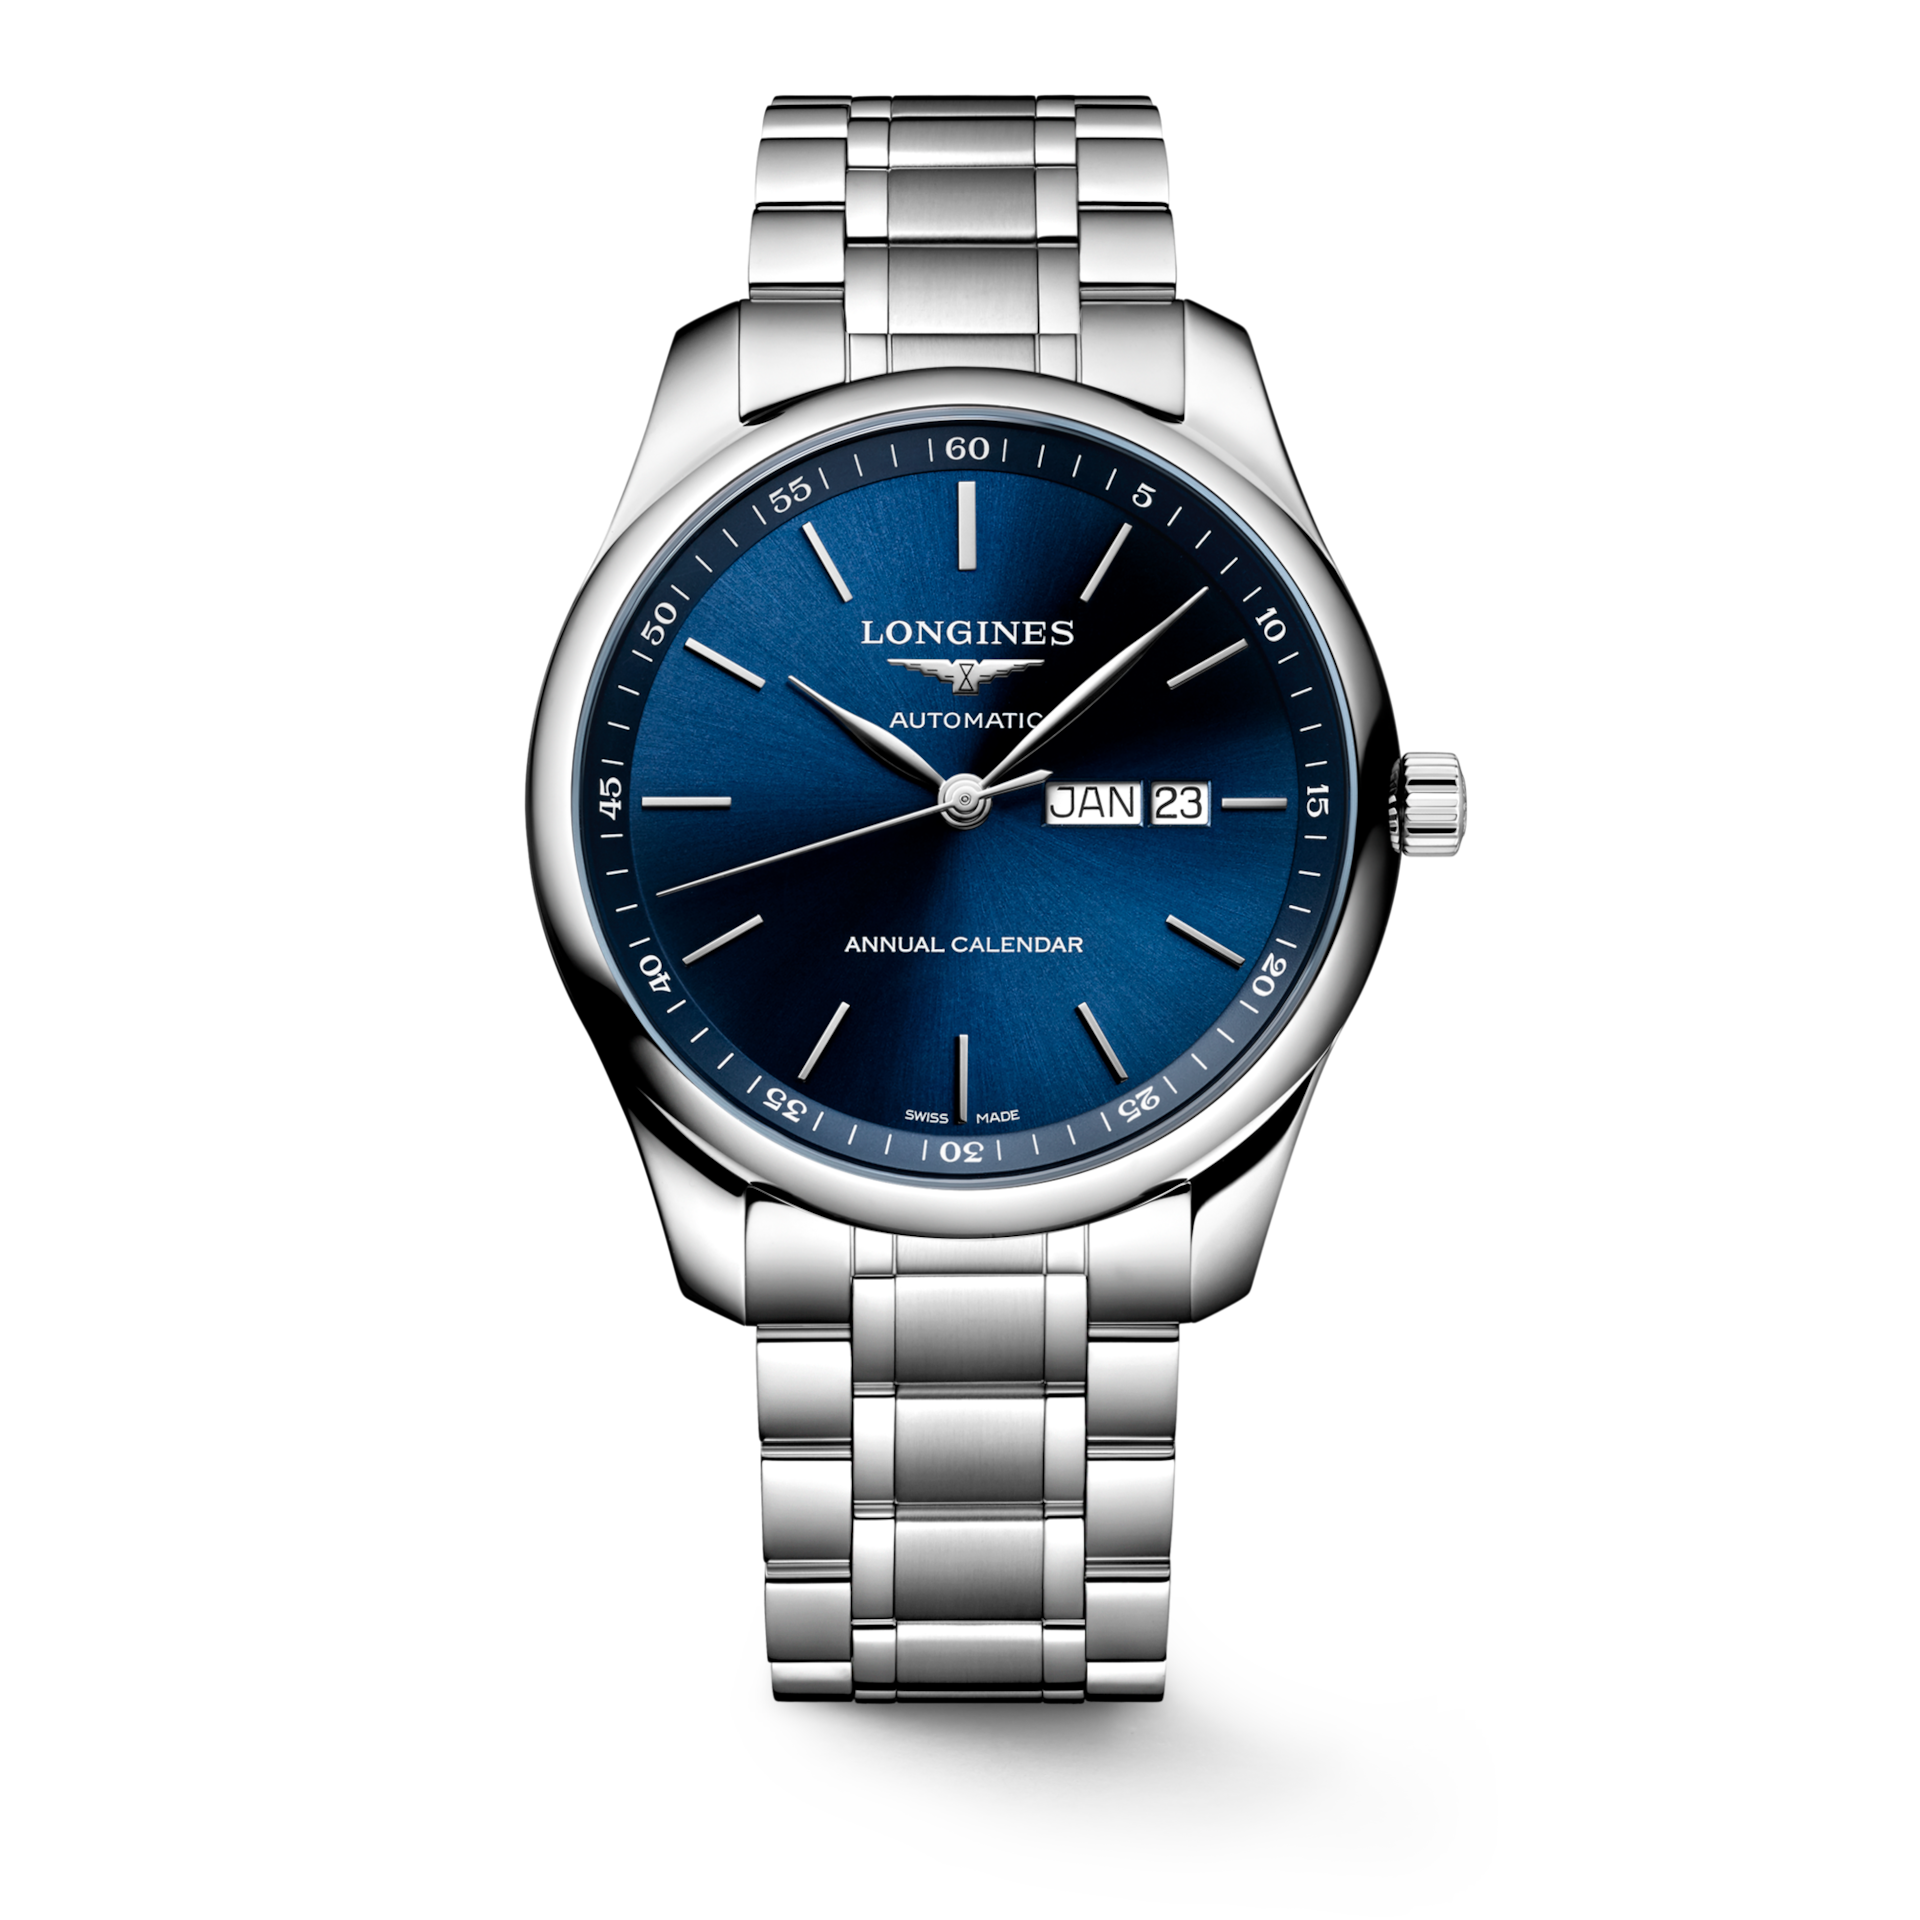 THE LONGINES MASTER COLLECTION L2.920.4.92.6